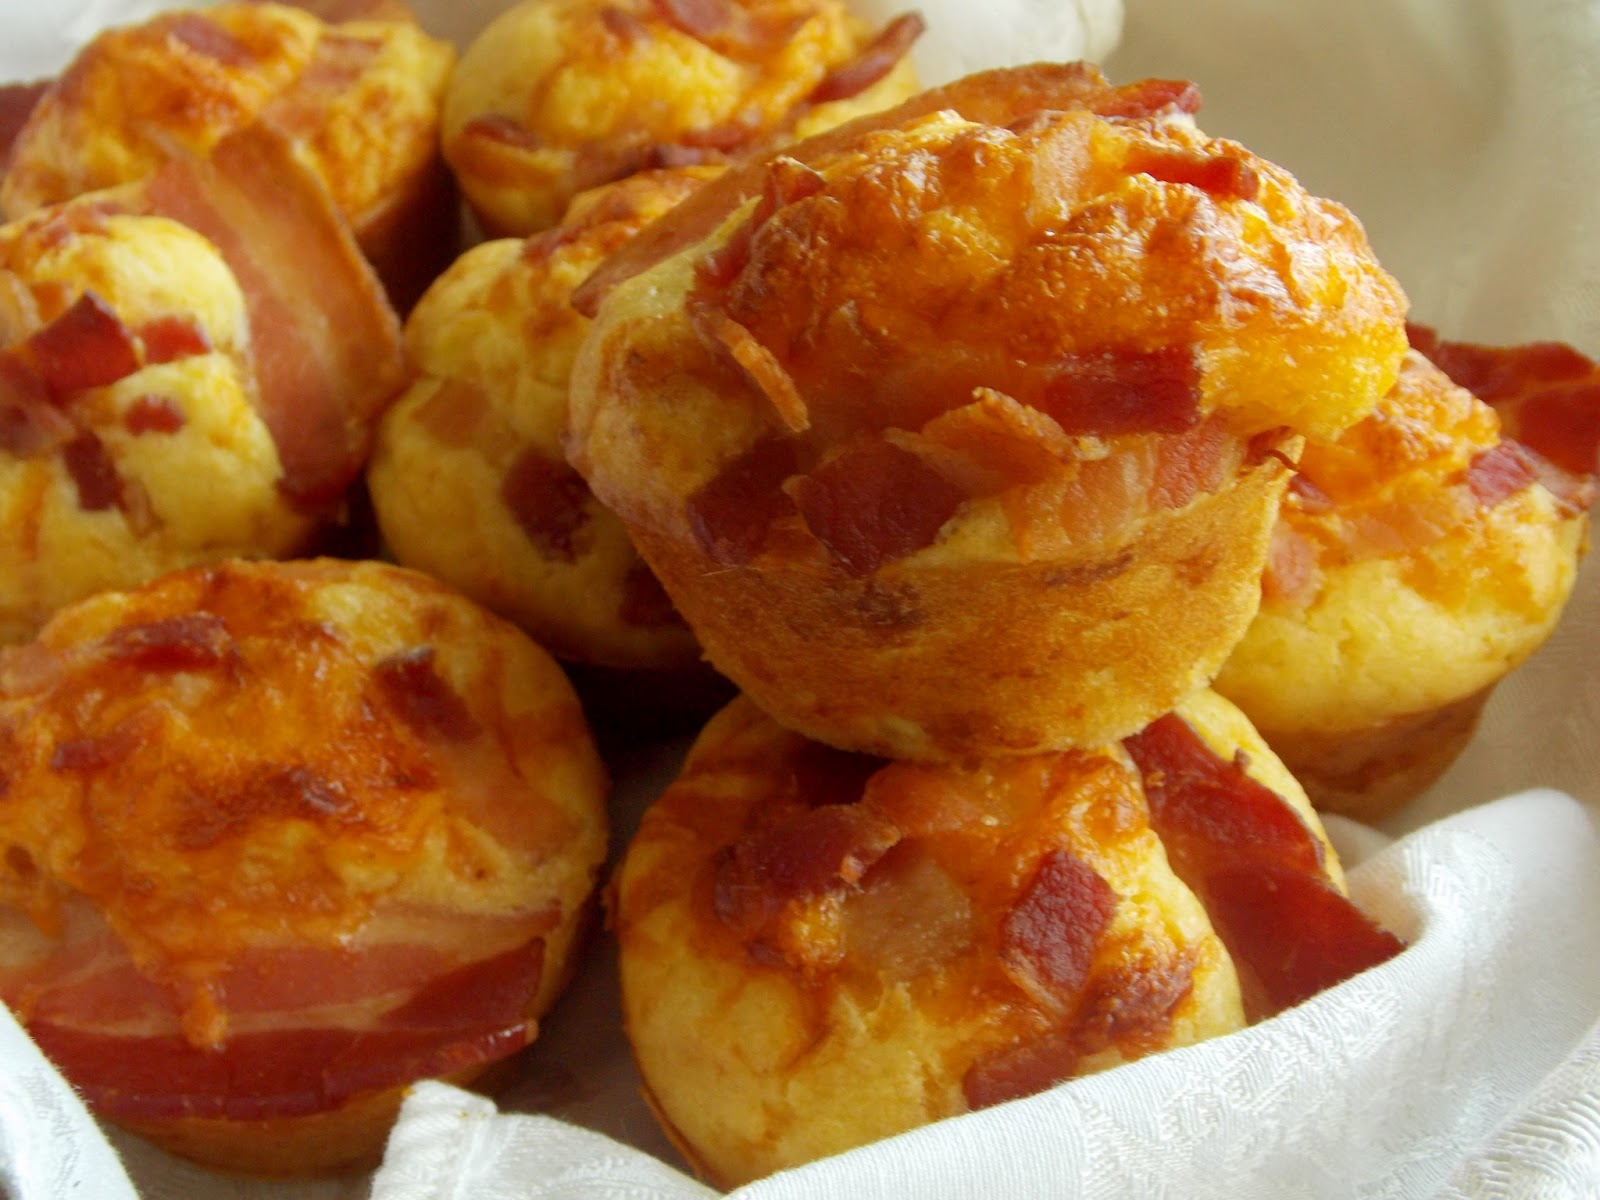 Food and Thrift: Bacon-and-Egg Muffins